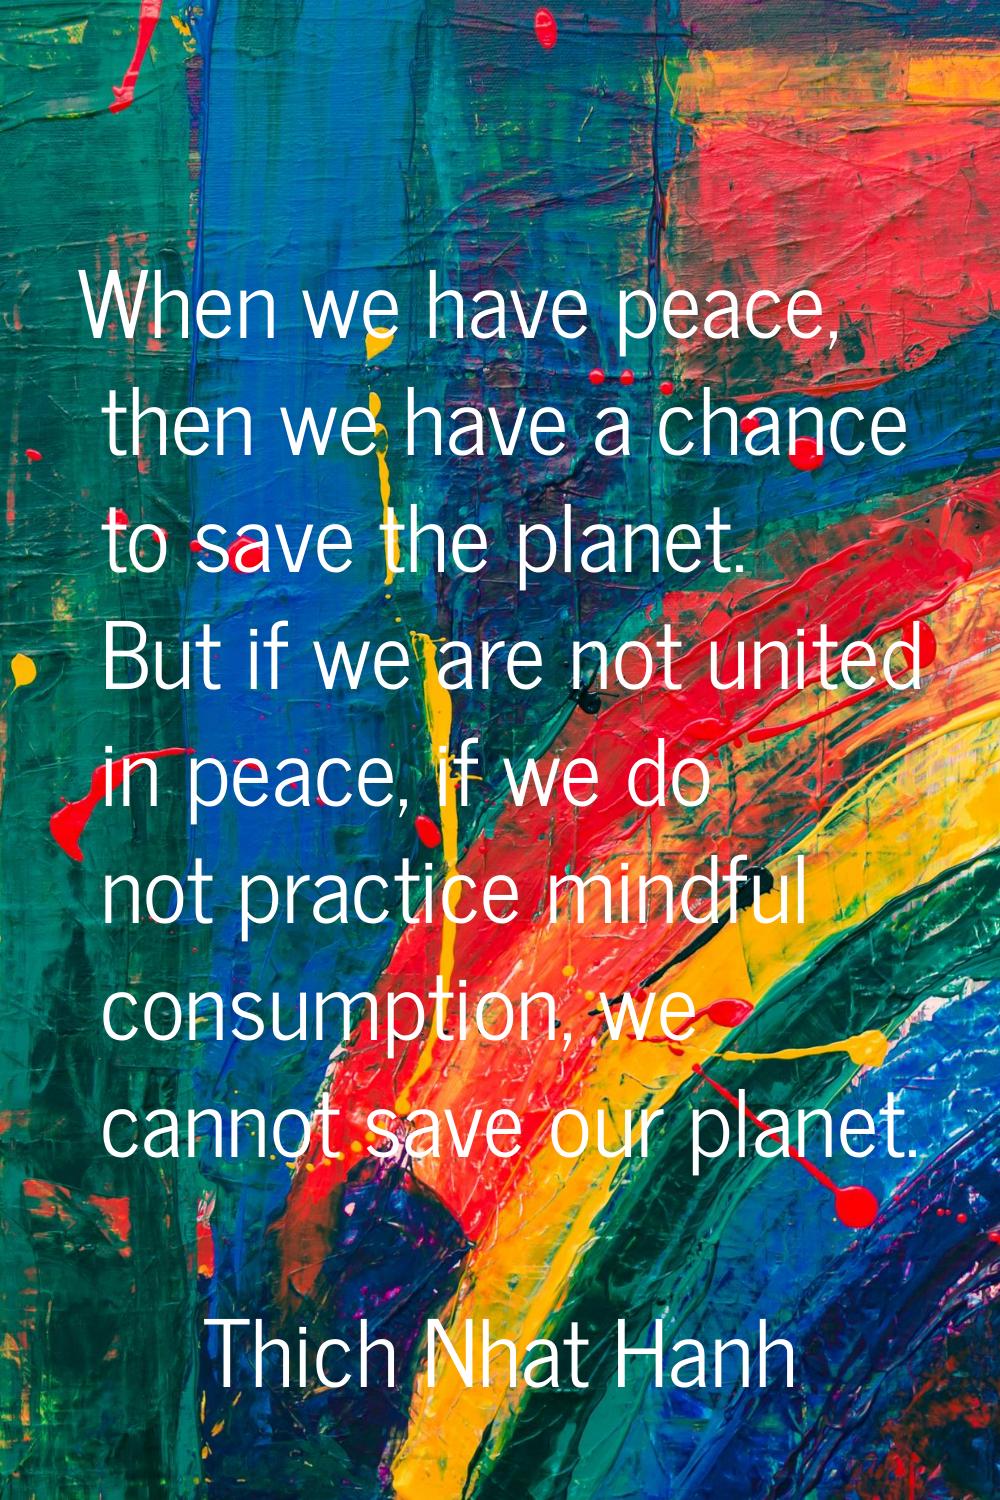 When we have peace, then we have a chance to save the planet. But if we are not united in peace, if